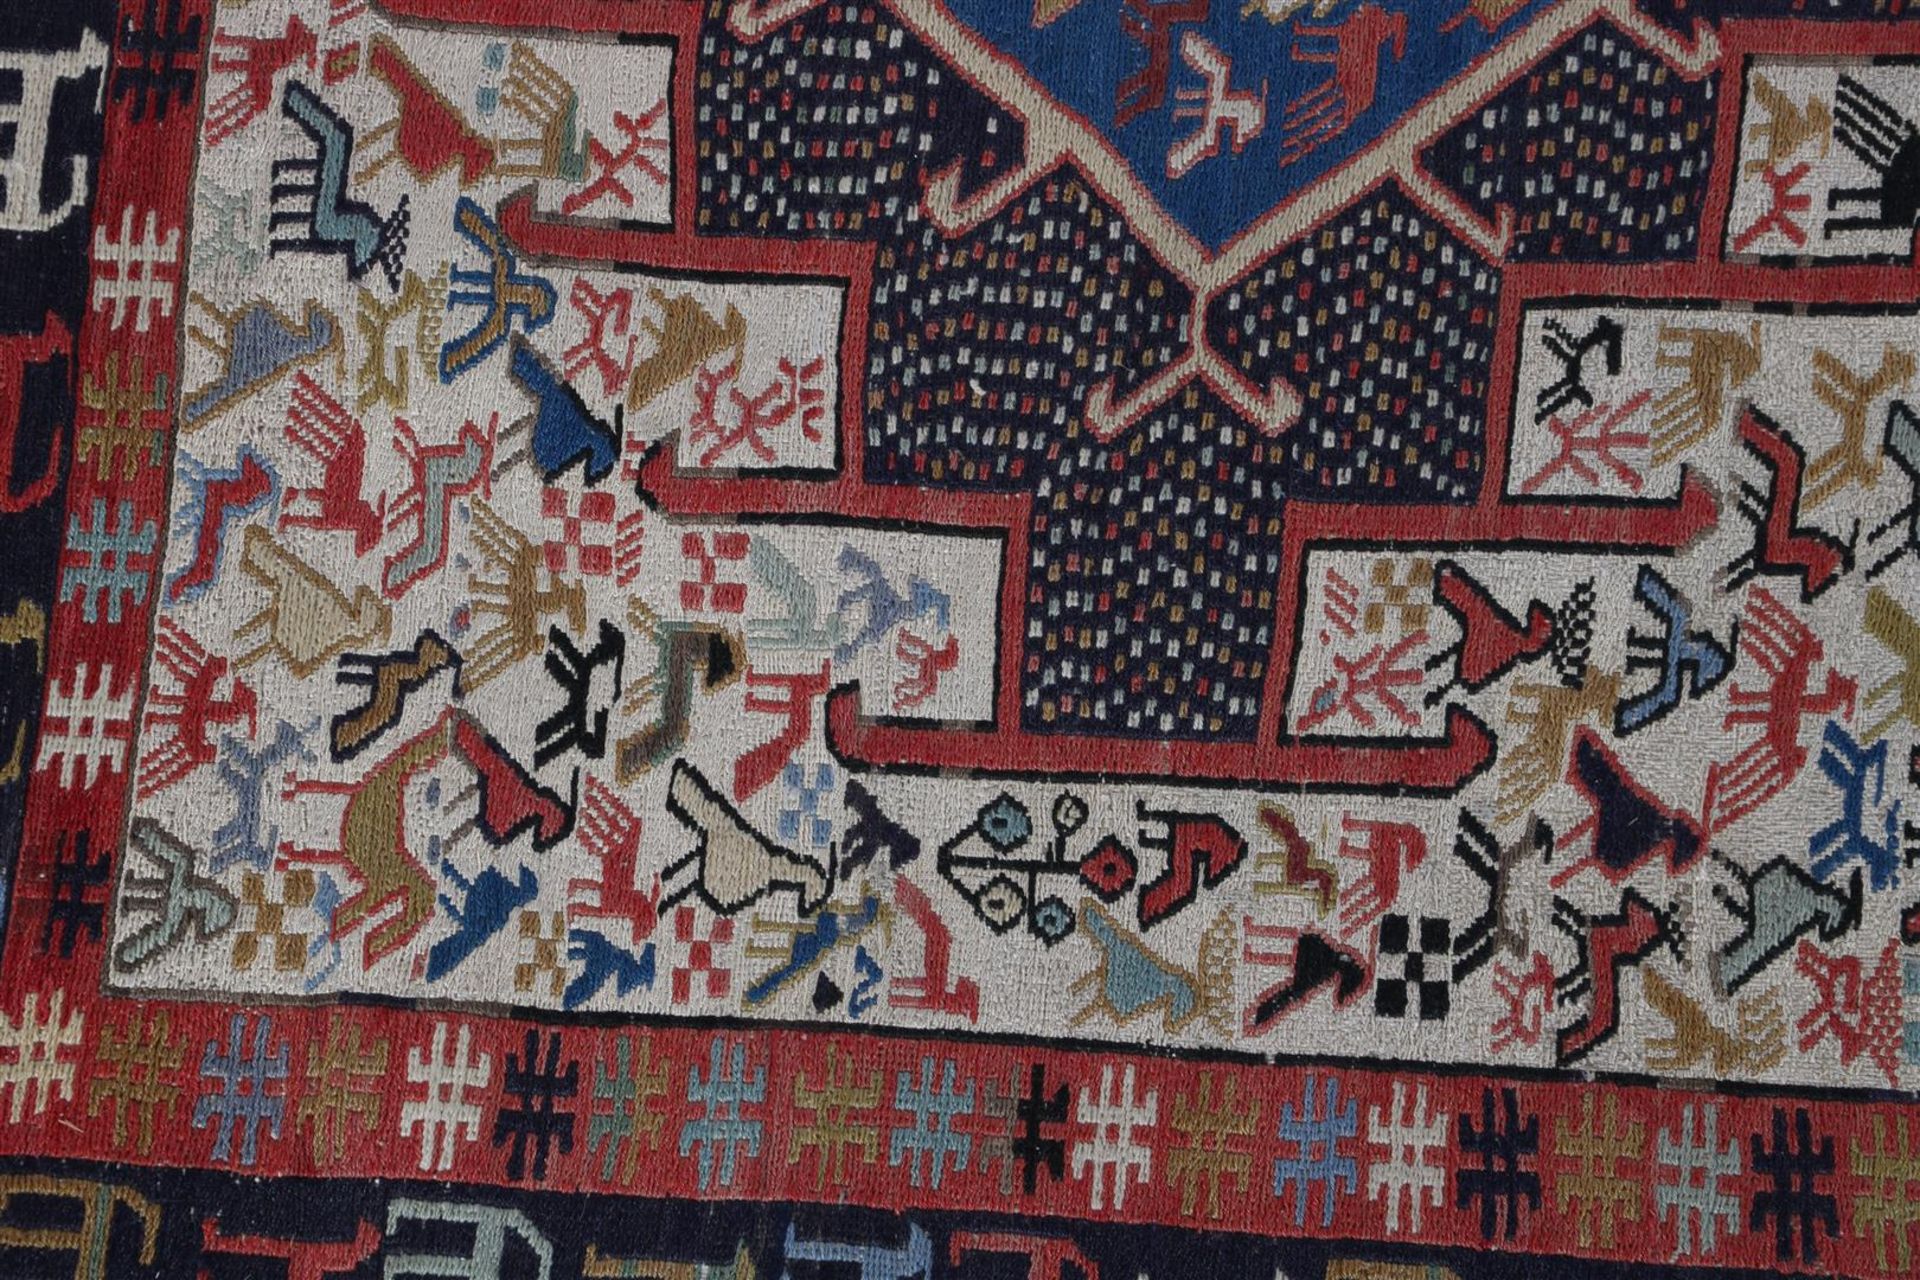 Hand-knotted kilim carpet - Image 3 of 4